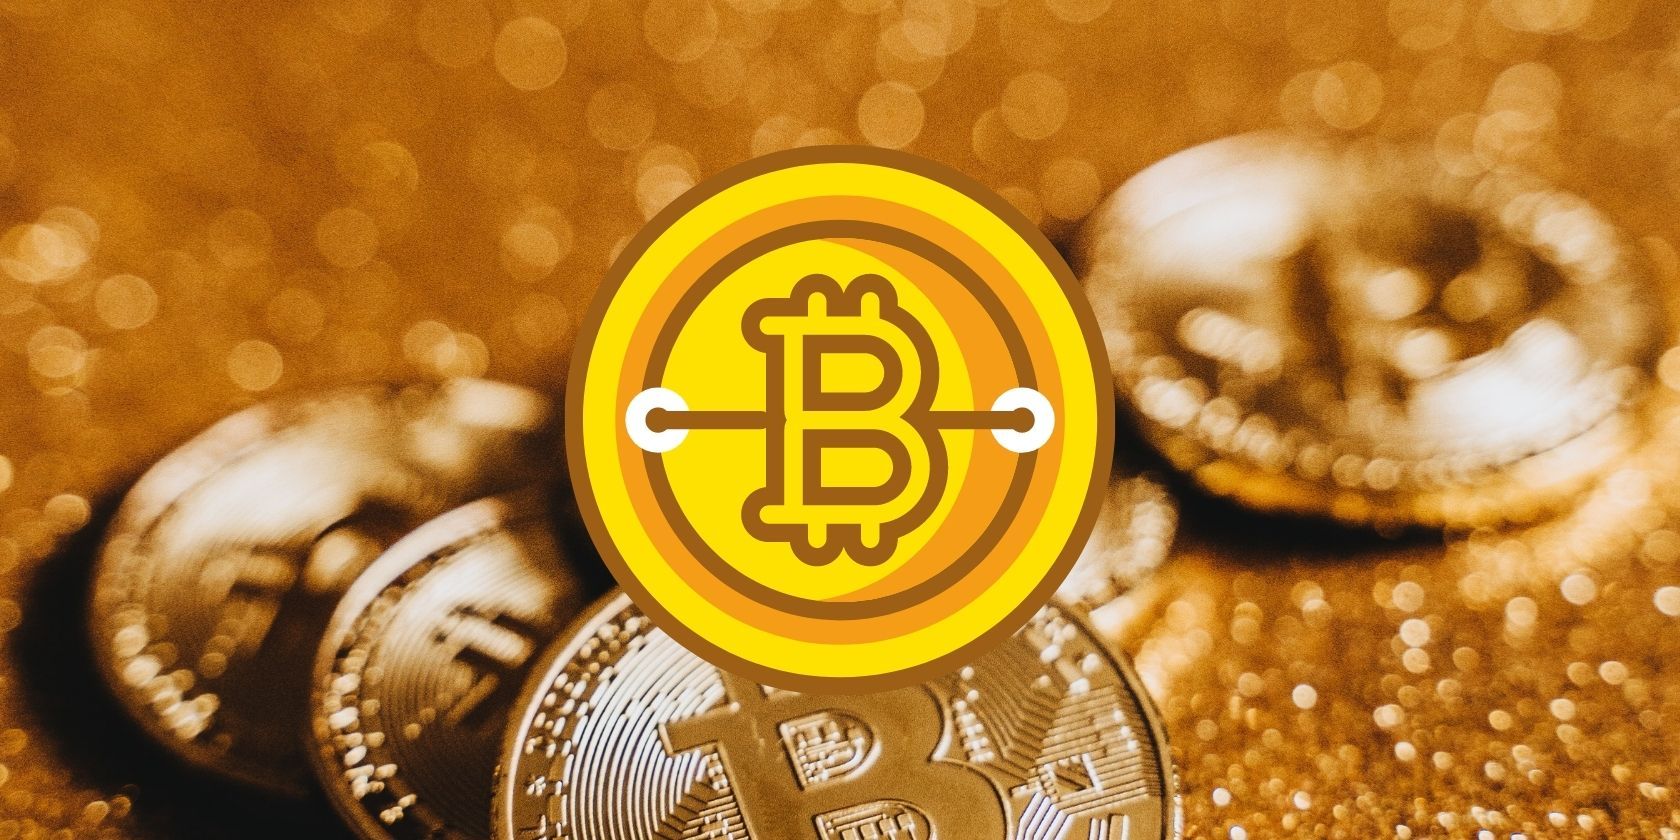 gold bitcoin logo in front of coins on gold glitter